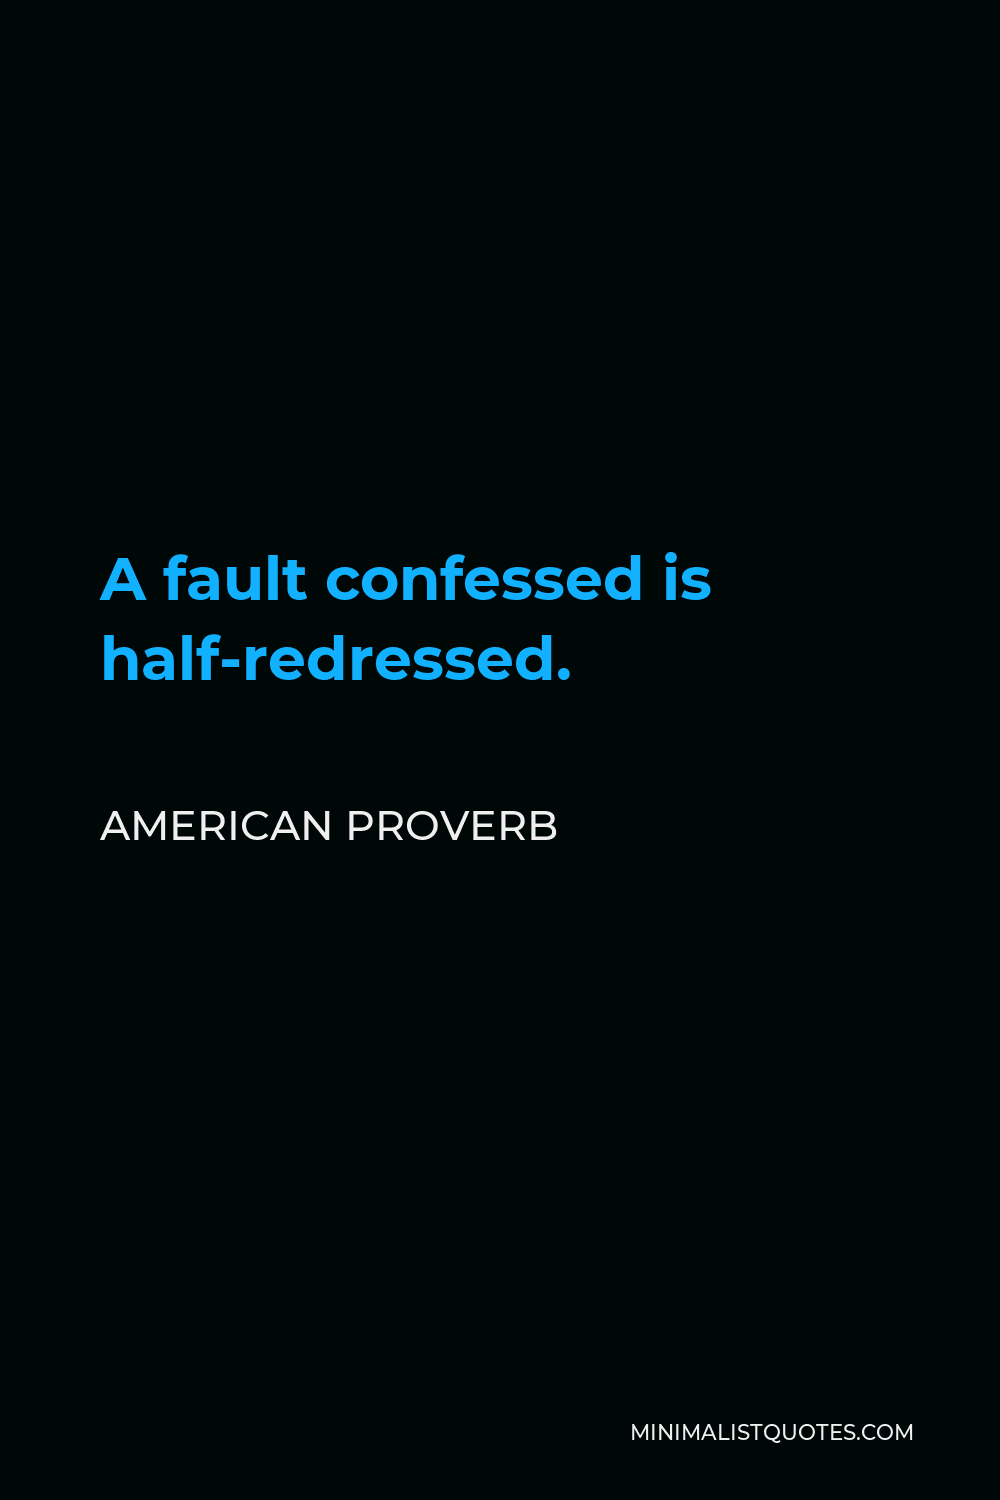 American Proverb Quote - A fault confessed is half-redressed.